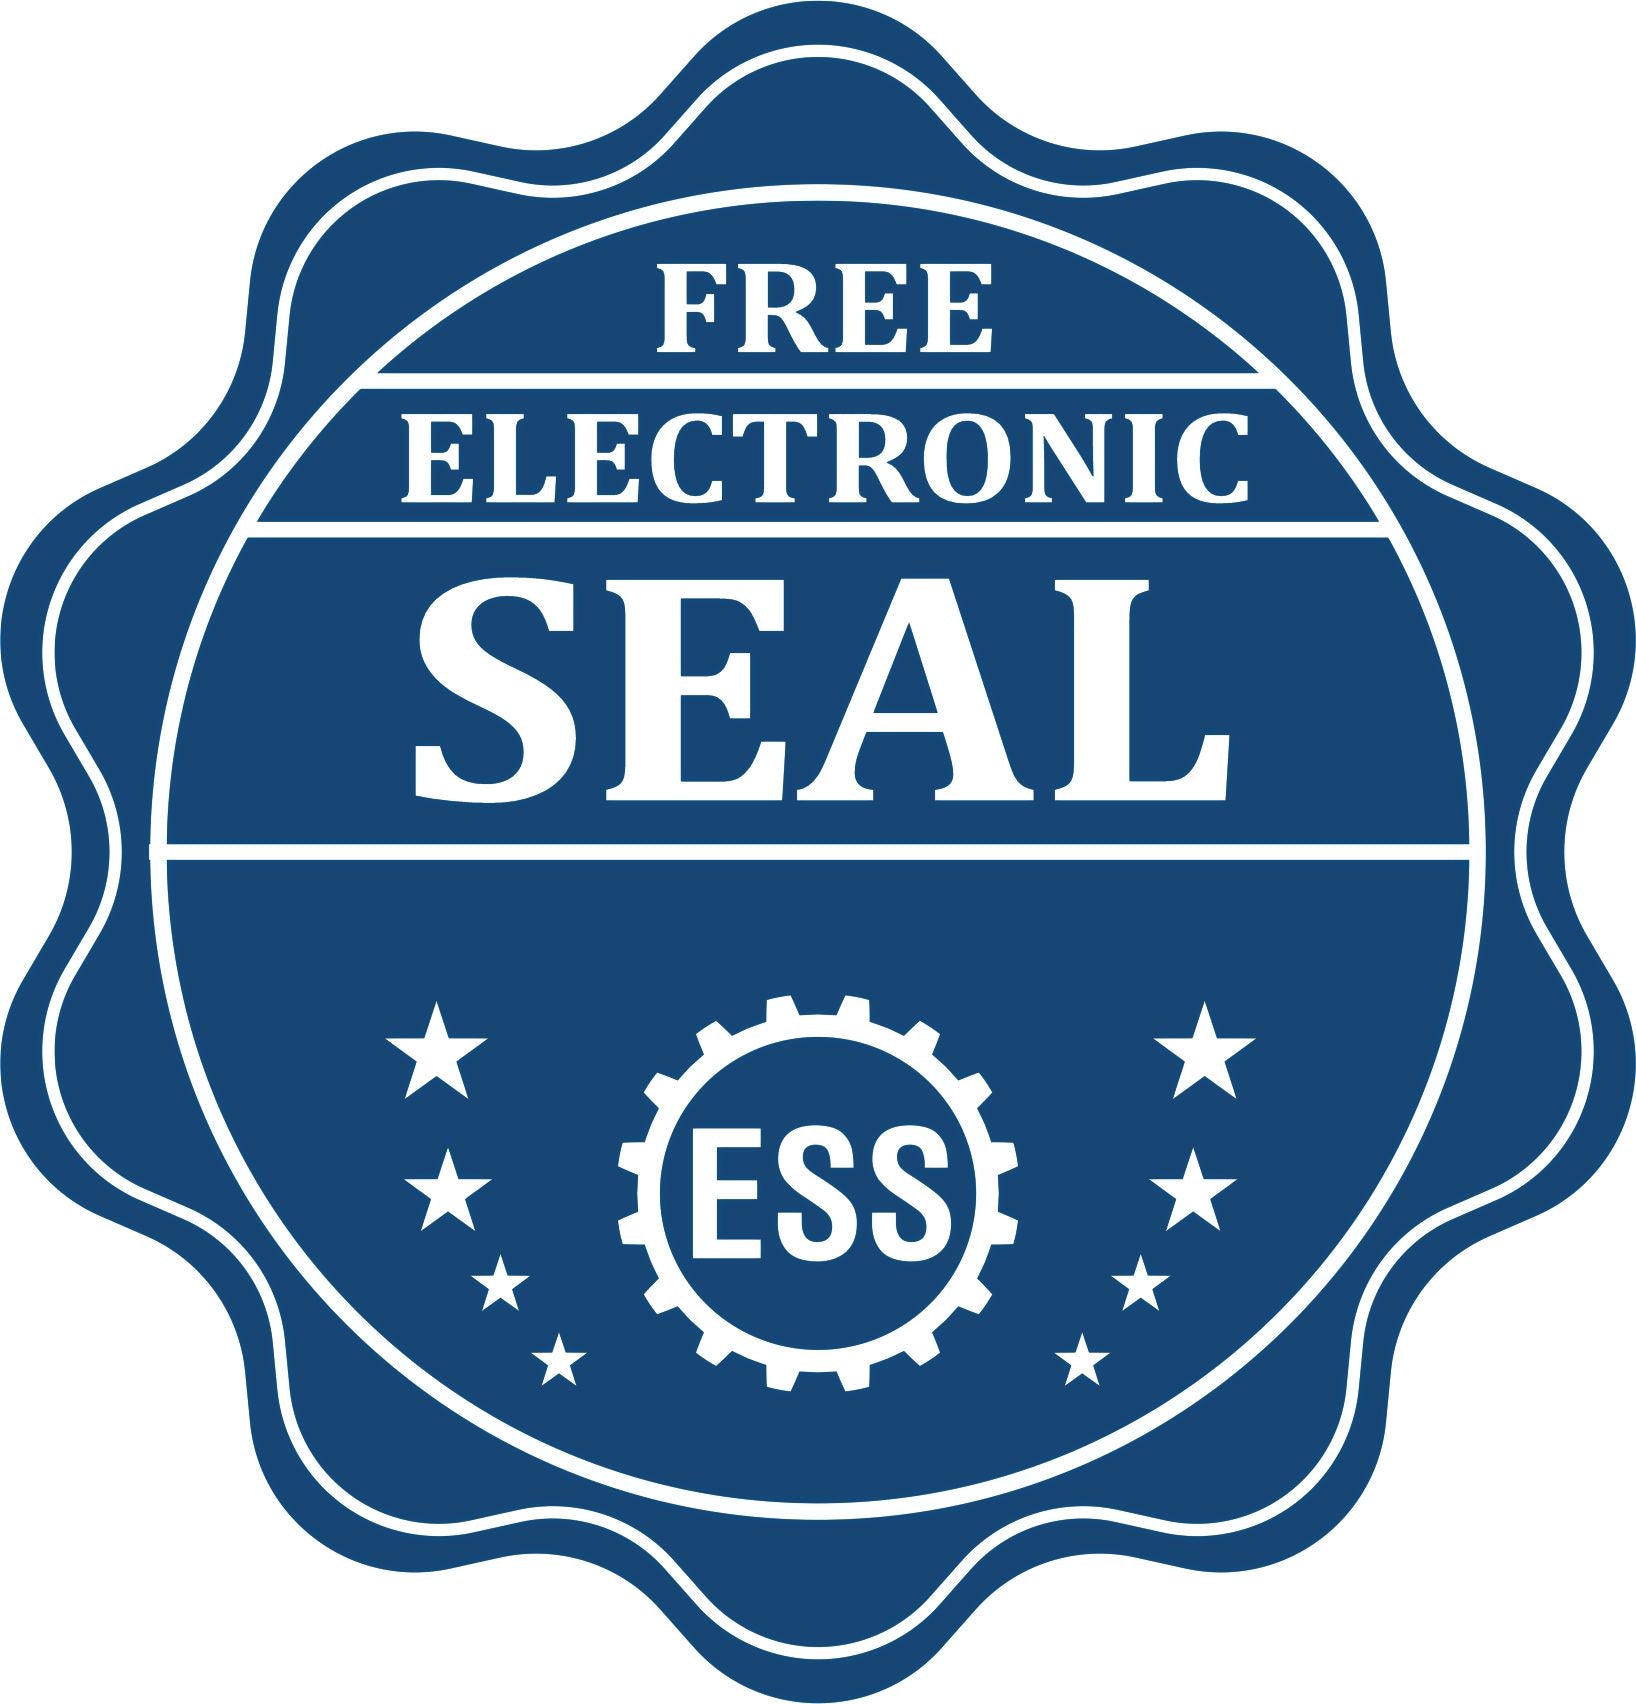 A badge showing a free electronic seal for the Soft North Dakota Professional Engineer Seal with stars and the ESS gear on the emblem.